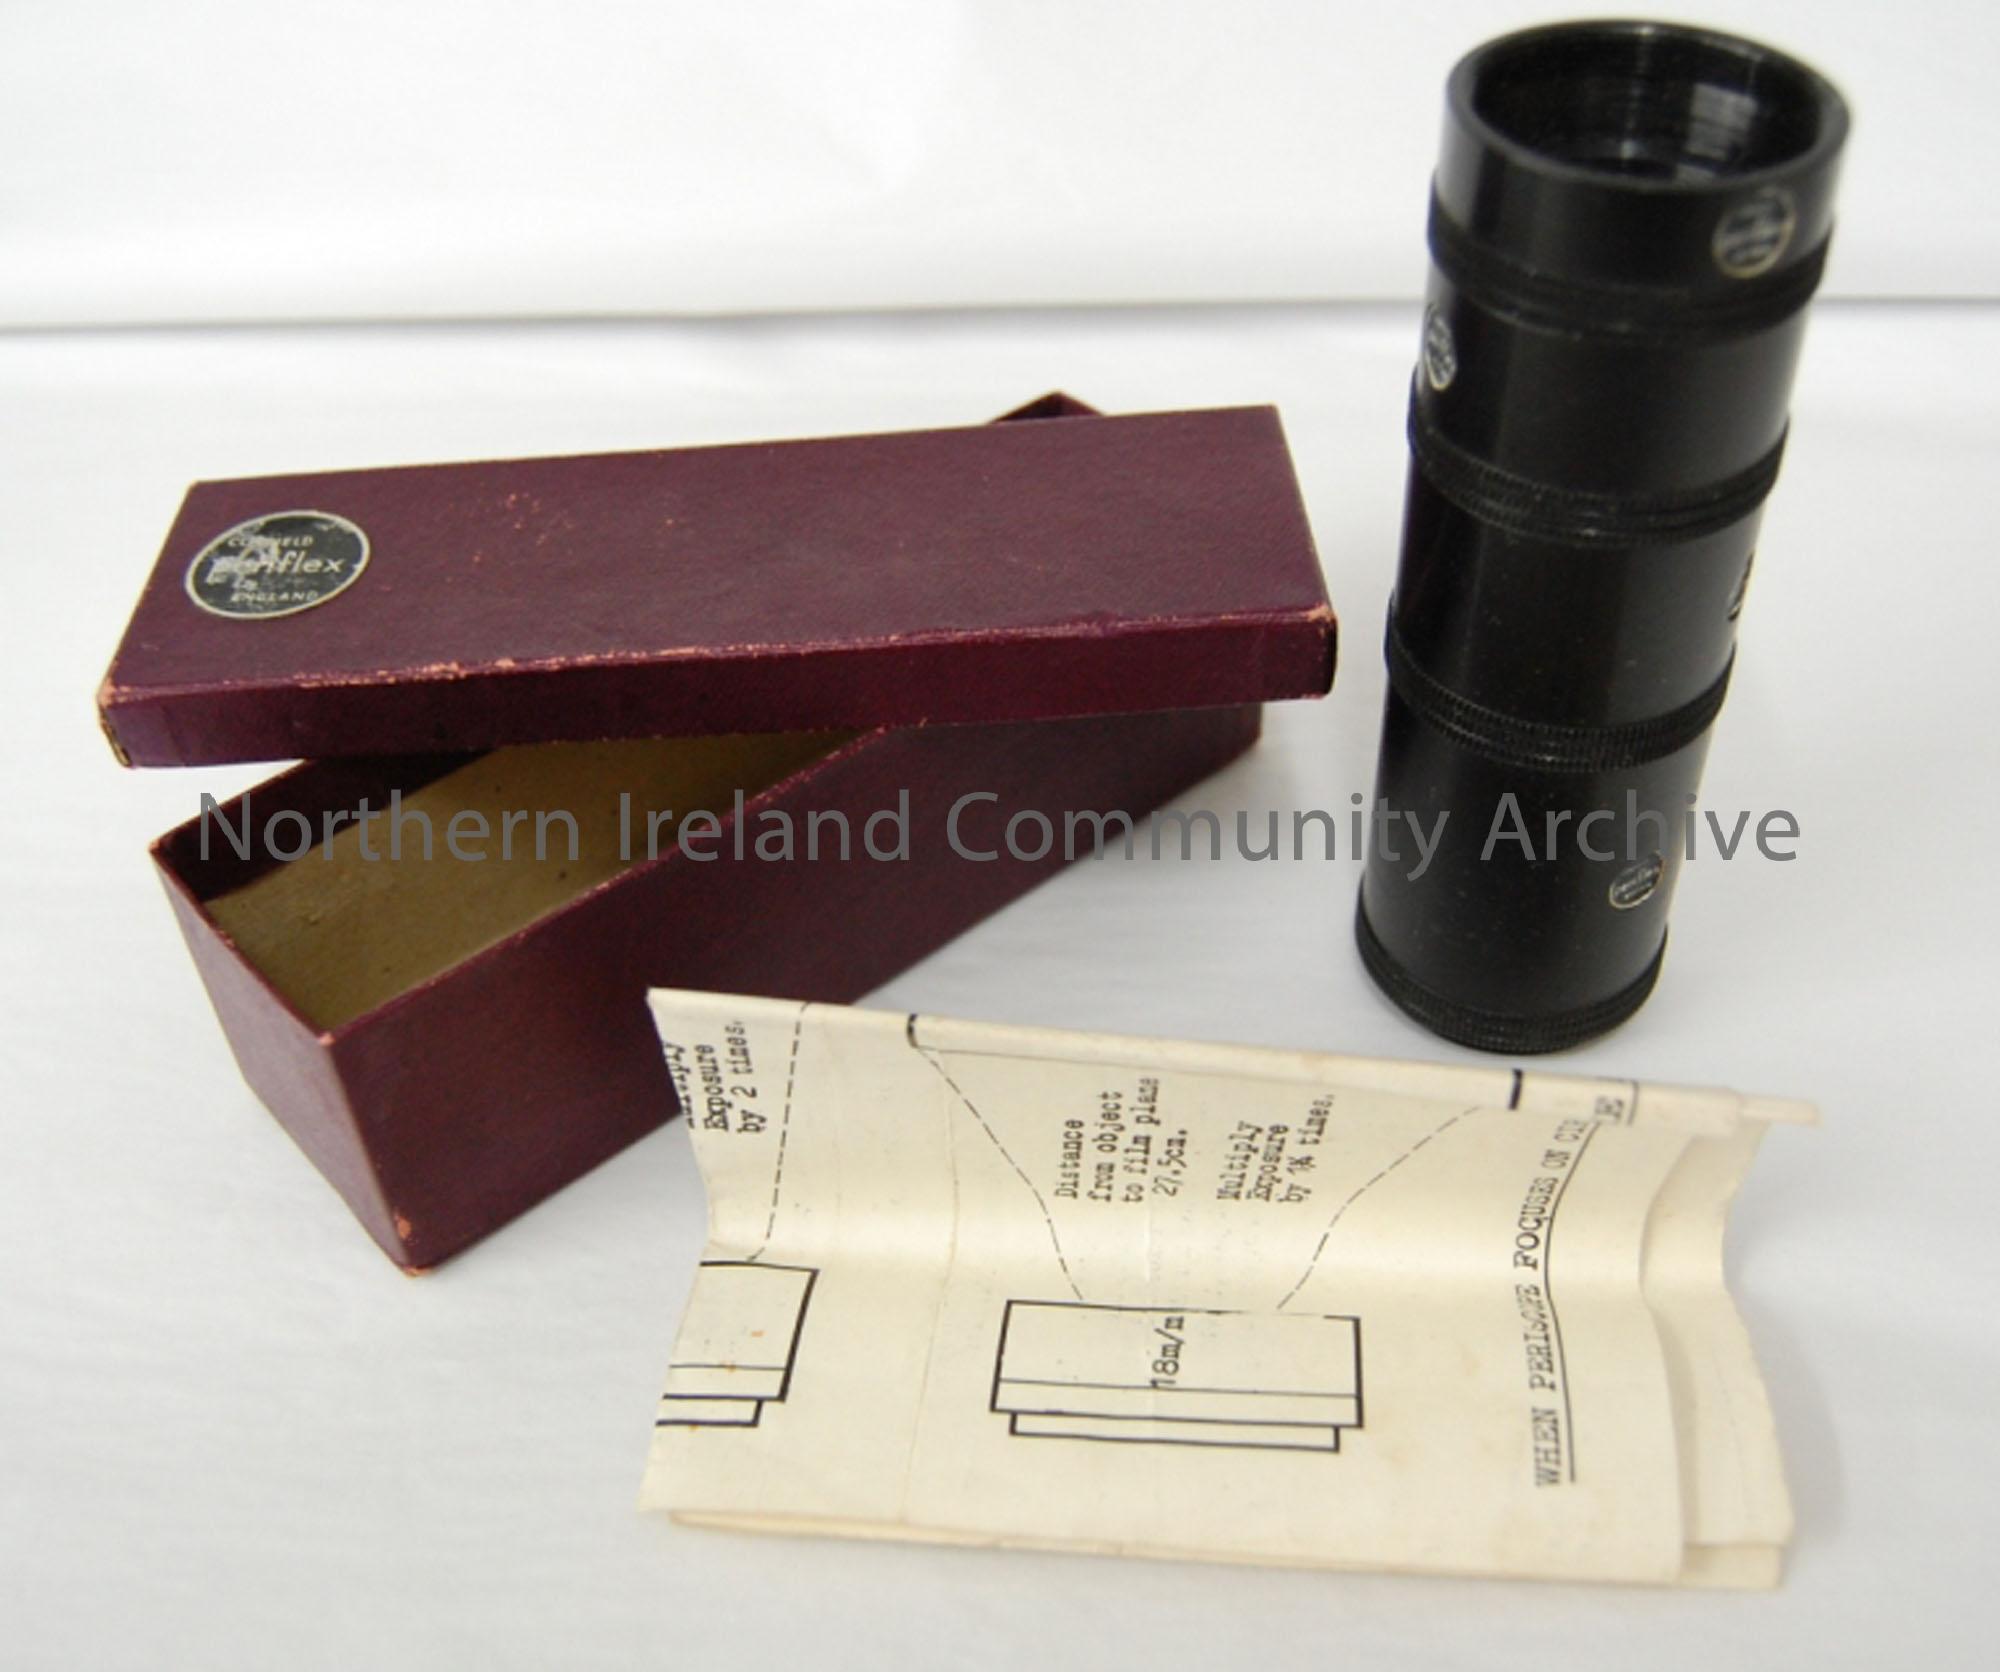 Corfield Periflex extension tubes in original burgundy coloured box with original instructions